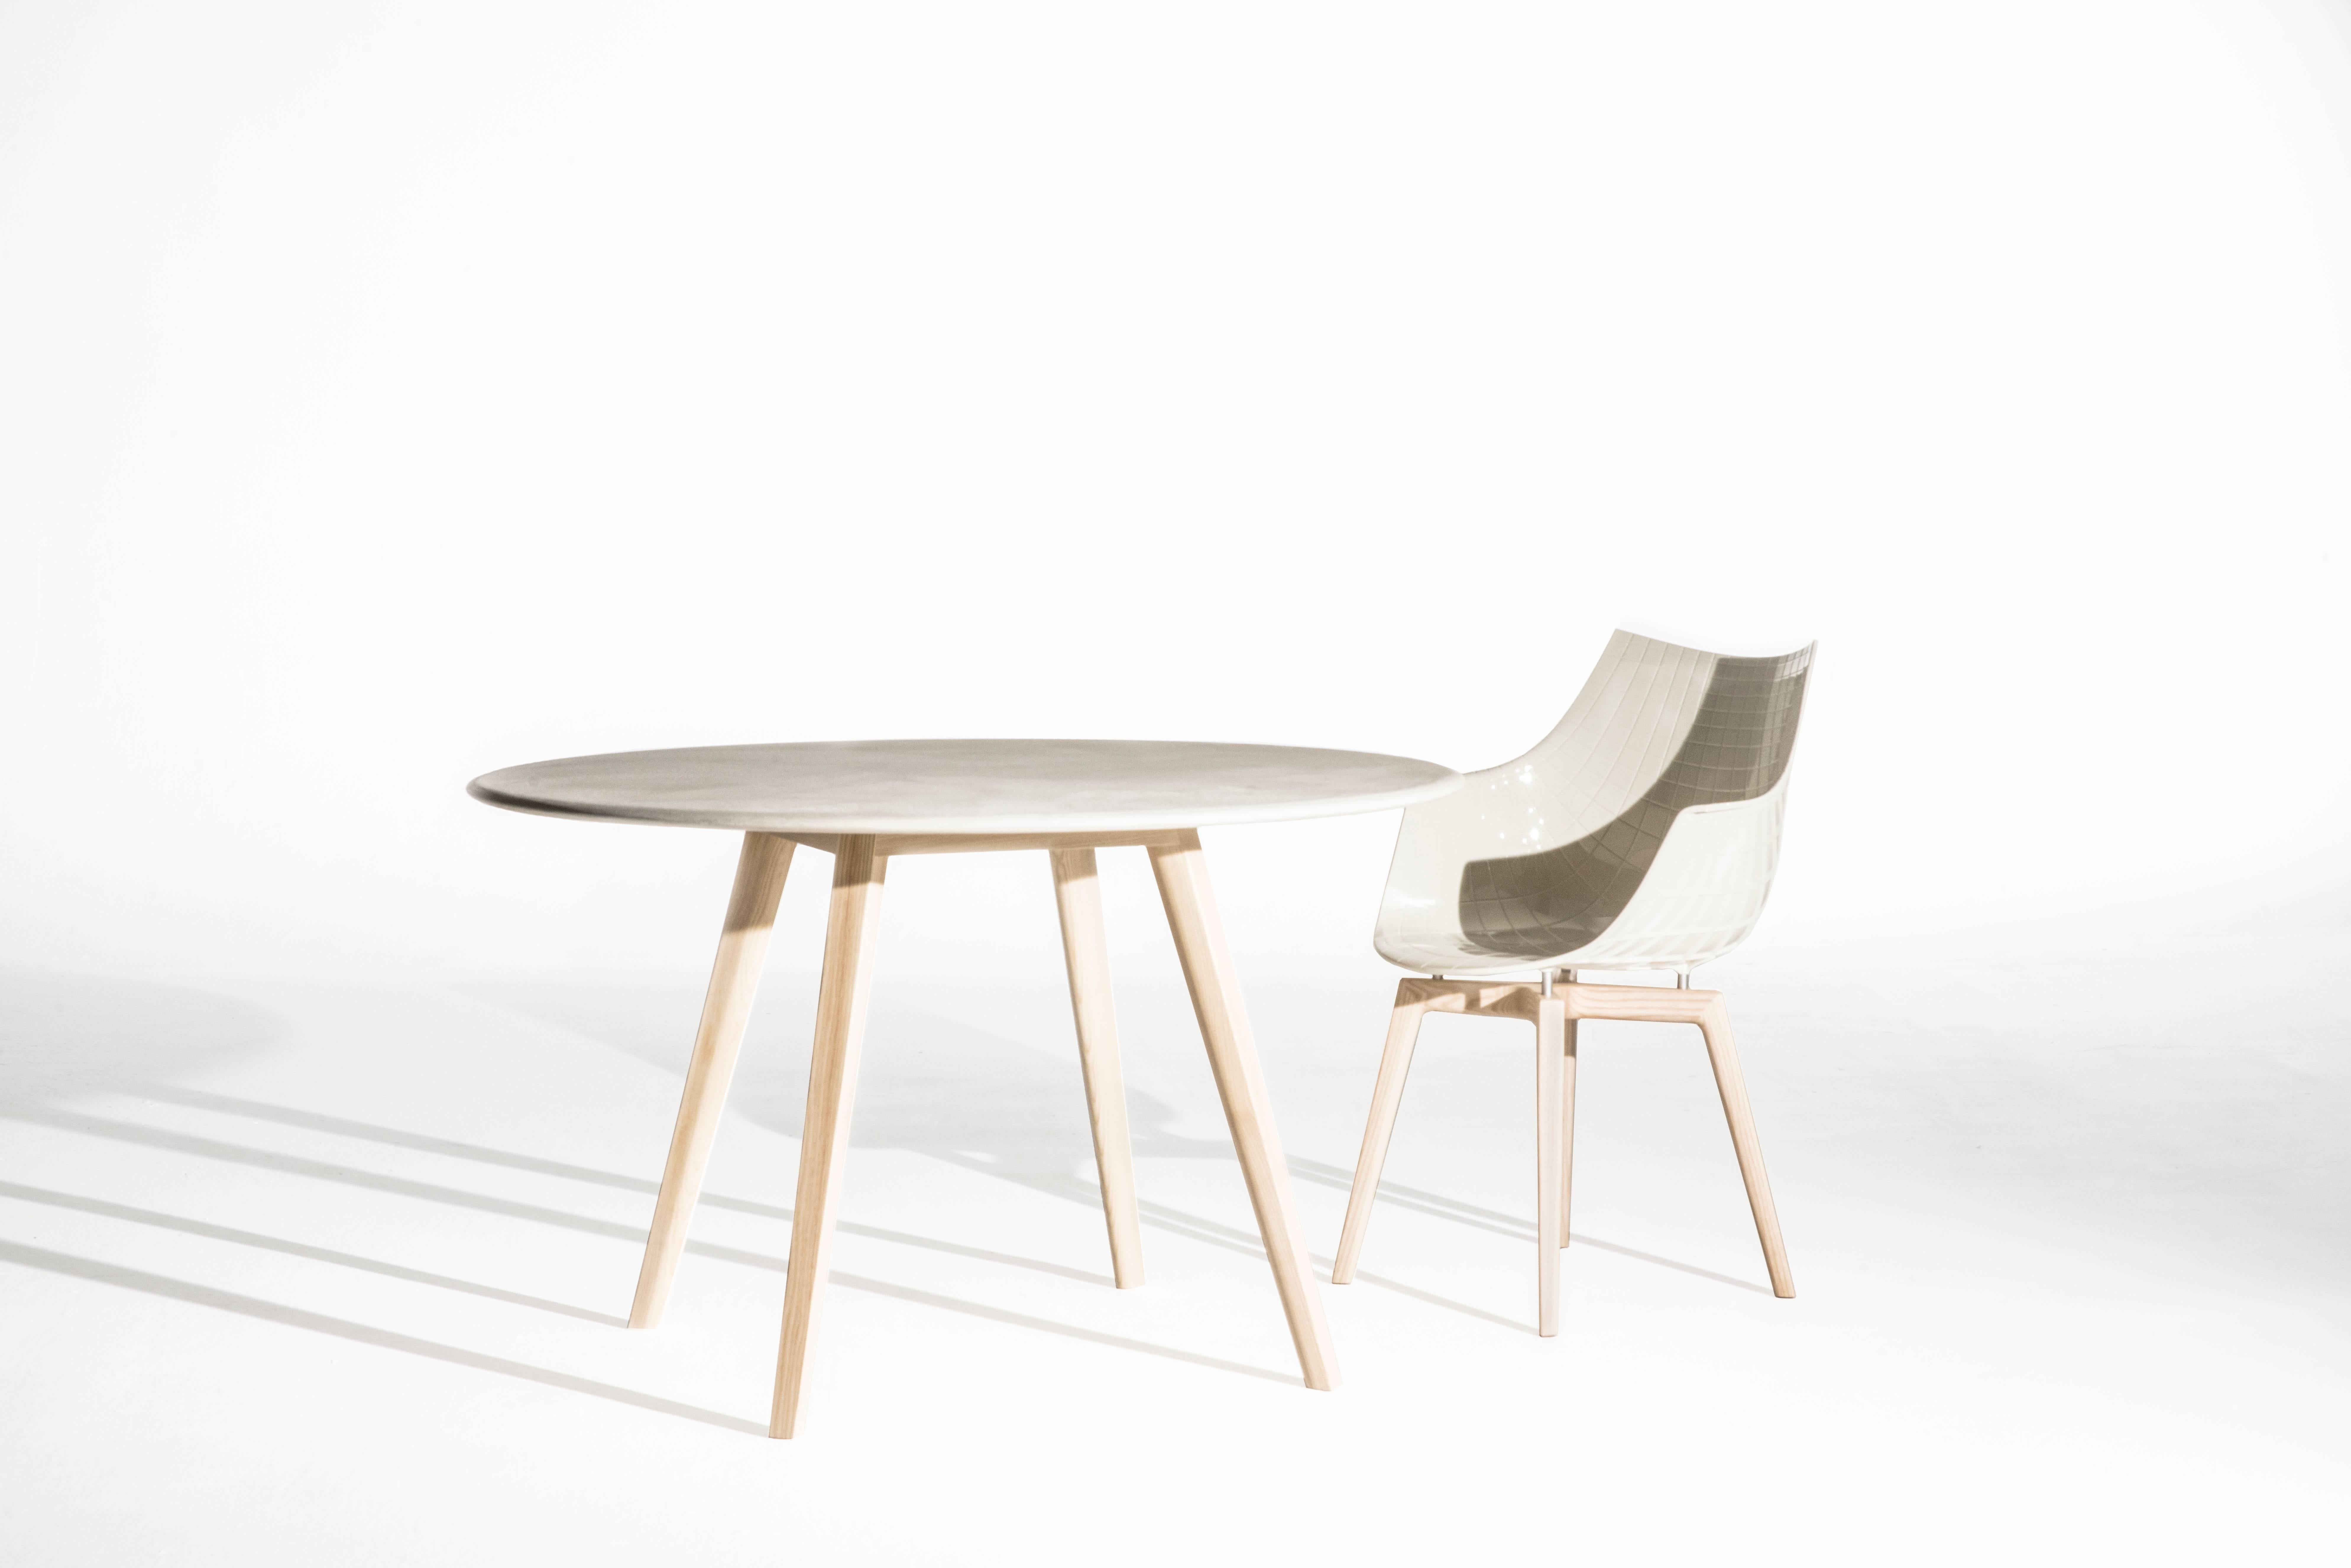 The Meridiana table stems from the ultimate globetrotter chair, revised this year with solid wooden legs. An archetype of the coffee shop or domestic table, it displays a precious balance between the round, wood particleboard top and the solid wood